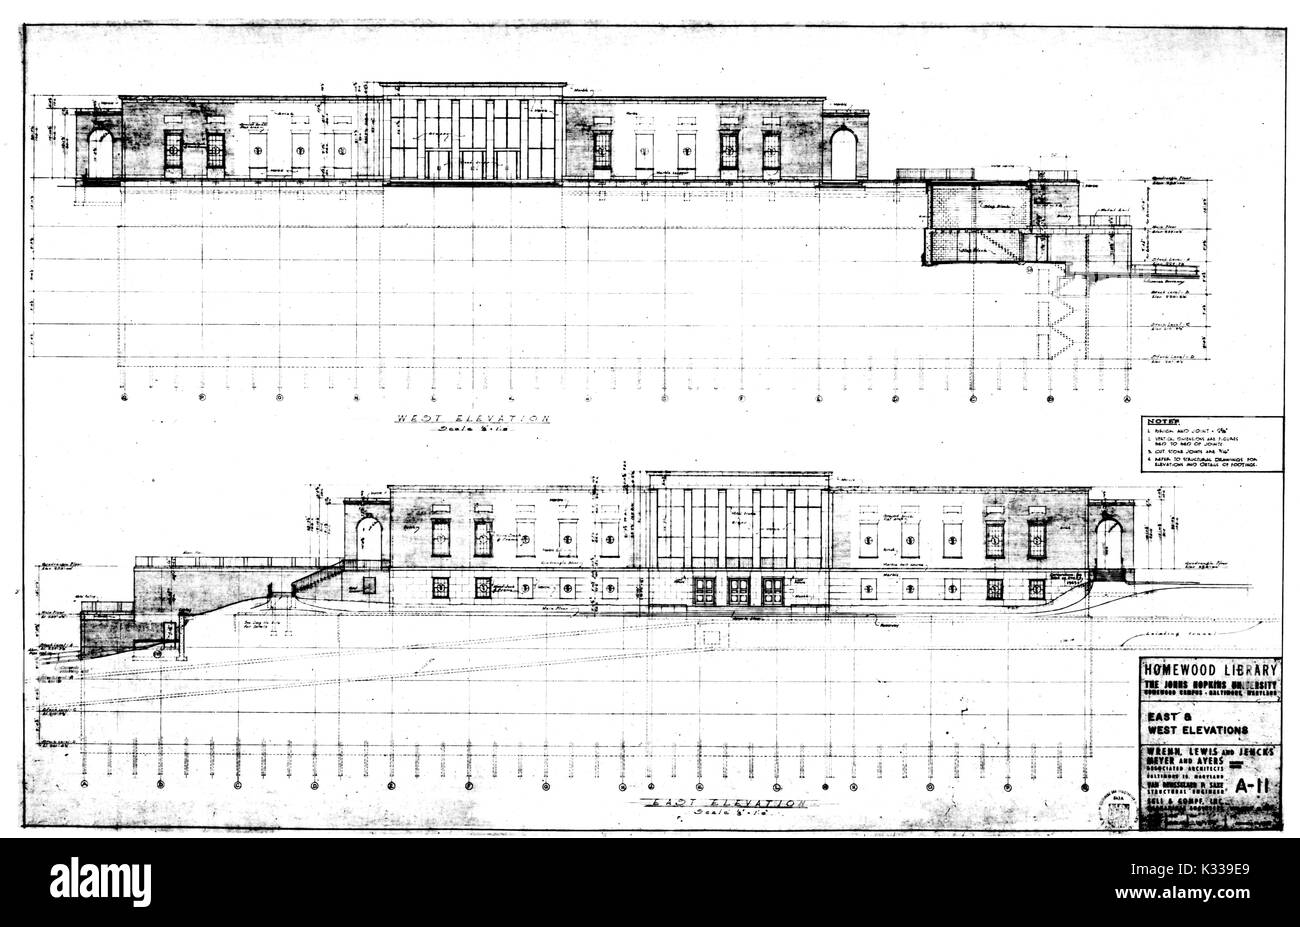 Architect's drawings for the construction of the Milton S Eisenhower Library at Johns Hopkins University, including the East and West elevations for the building, sketched on white paper, Baltimore, Maryland, 1963. Stock Photo